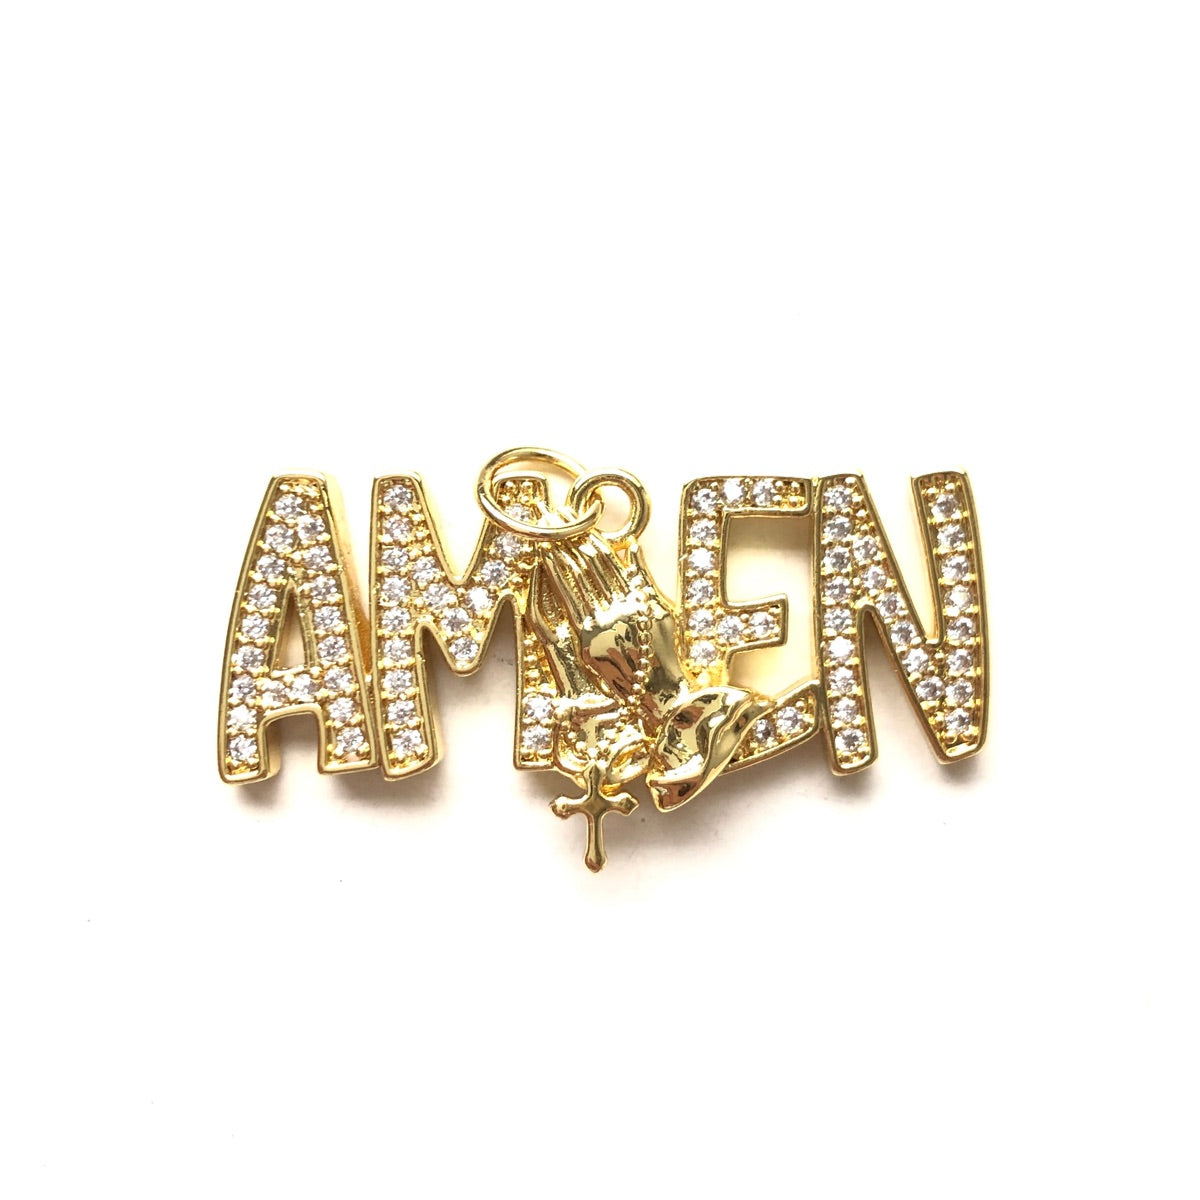 10pcs/lot CZ Pave Praying Hands Amen Word Charms CZ Paved Charms Christian Quotes New Charms Arrivals Charms Beads Beyond